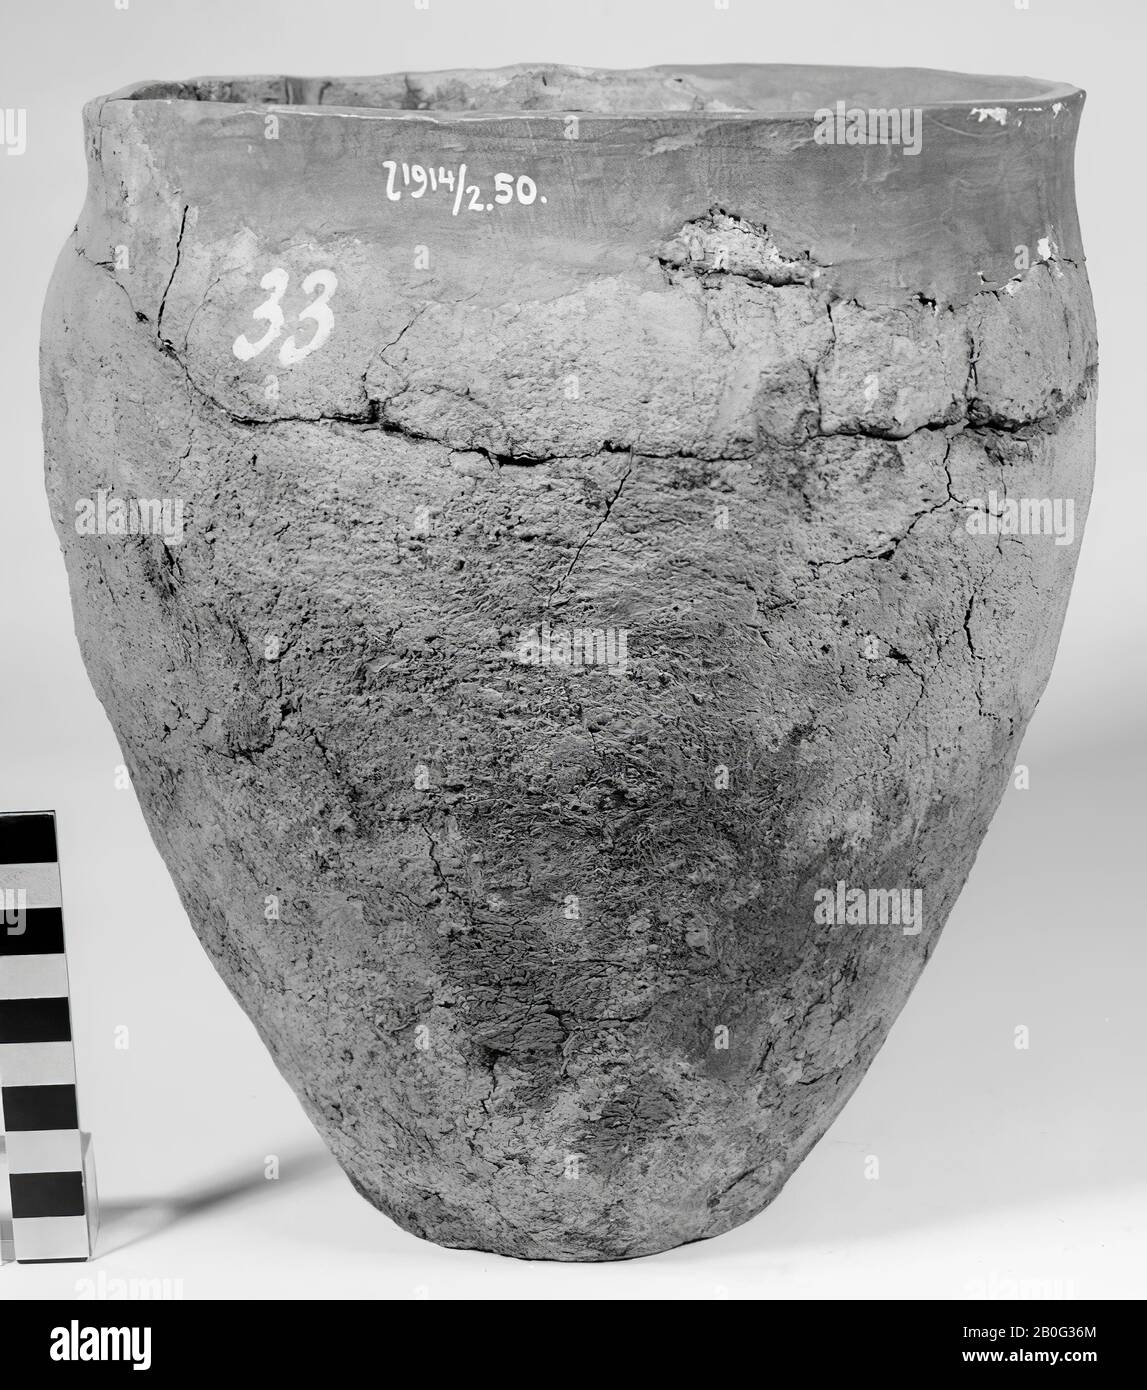 Cylindrical urn of earthenware. Old bondings and additions. Contains cremated residues, urn, earthenware, h: 24.5 cm, diam: 23.4 cm, prehistory -800 Stock Photo